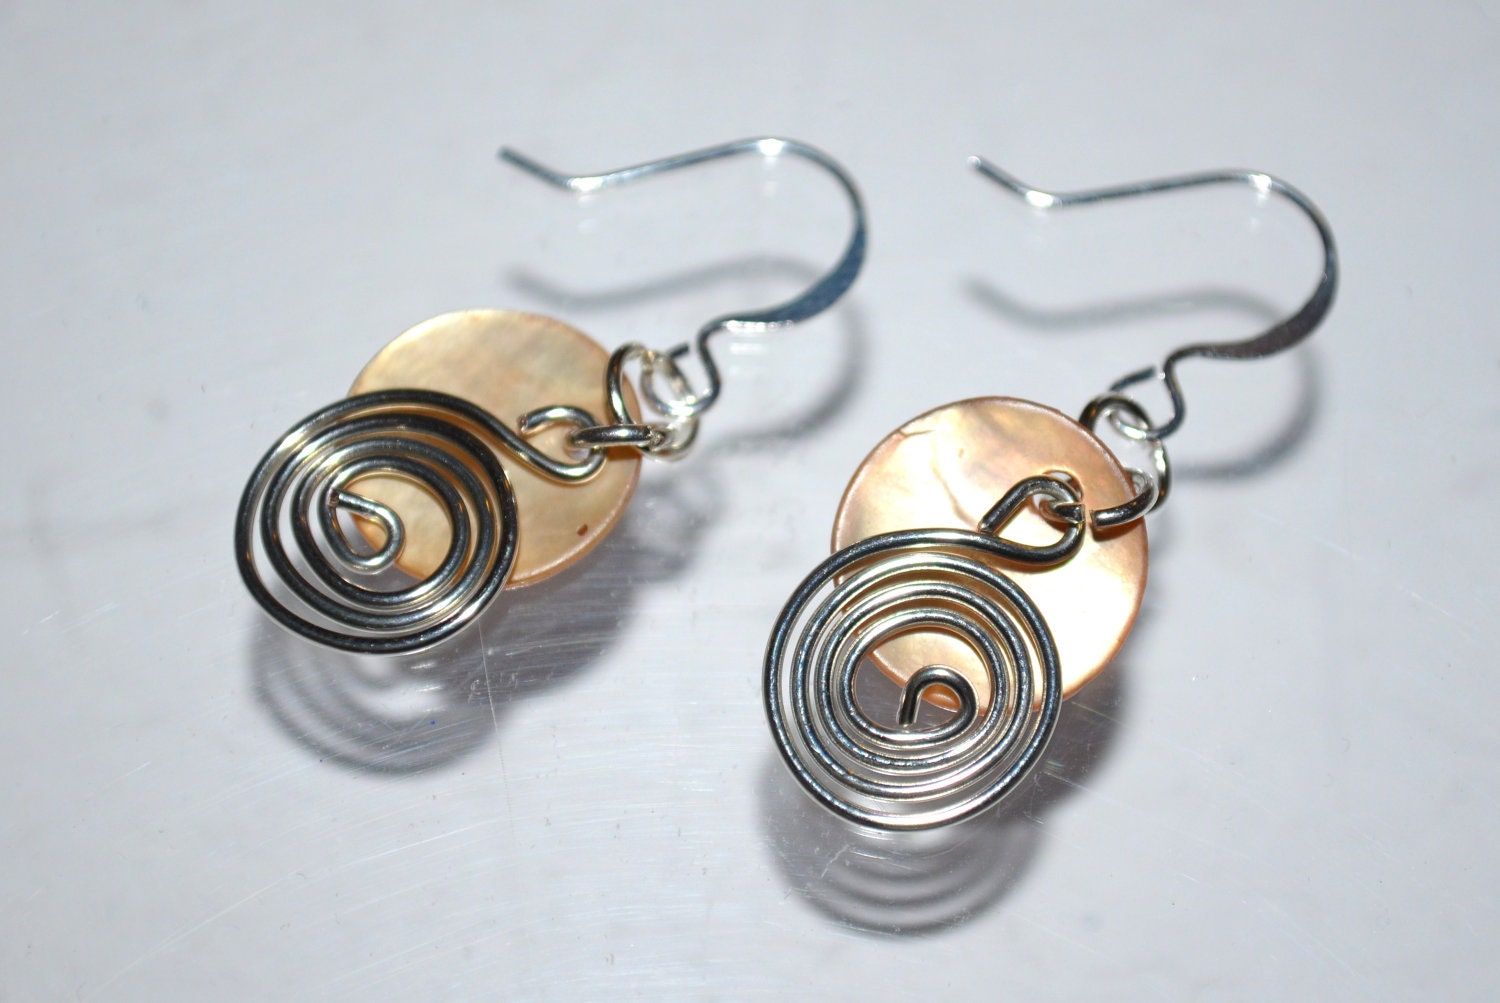 Wire and shell earrings-natural color shell earrings with wire swirls--beach wear-inexpensive gift for her - Designami